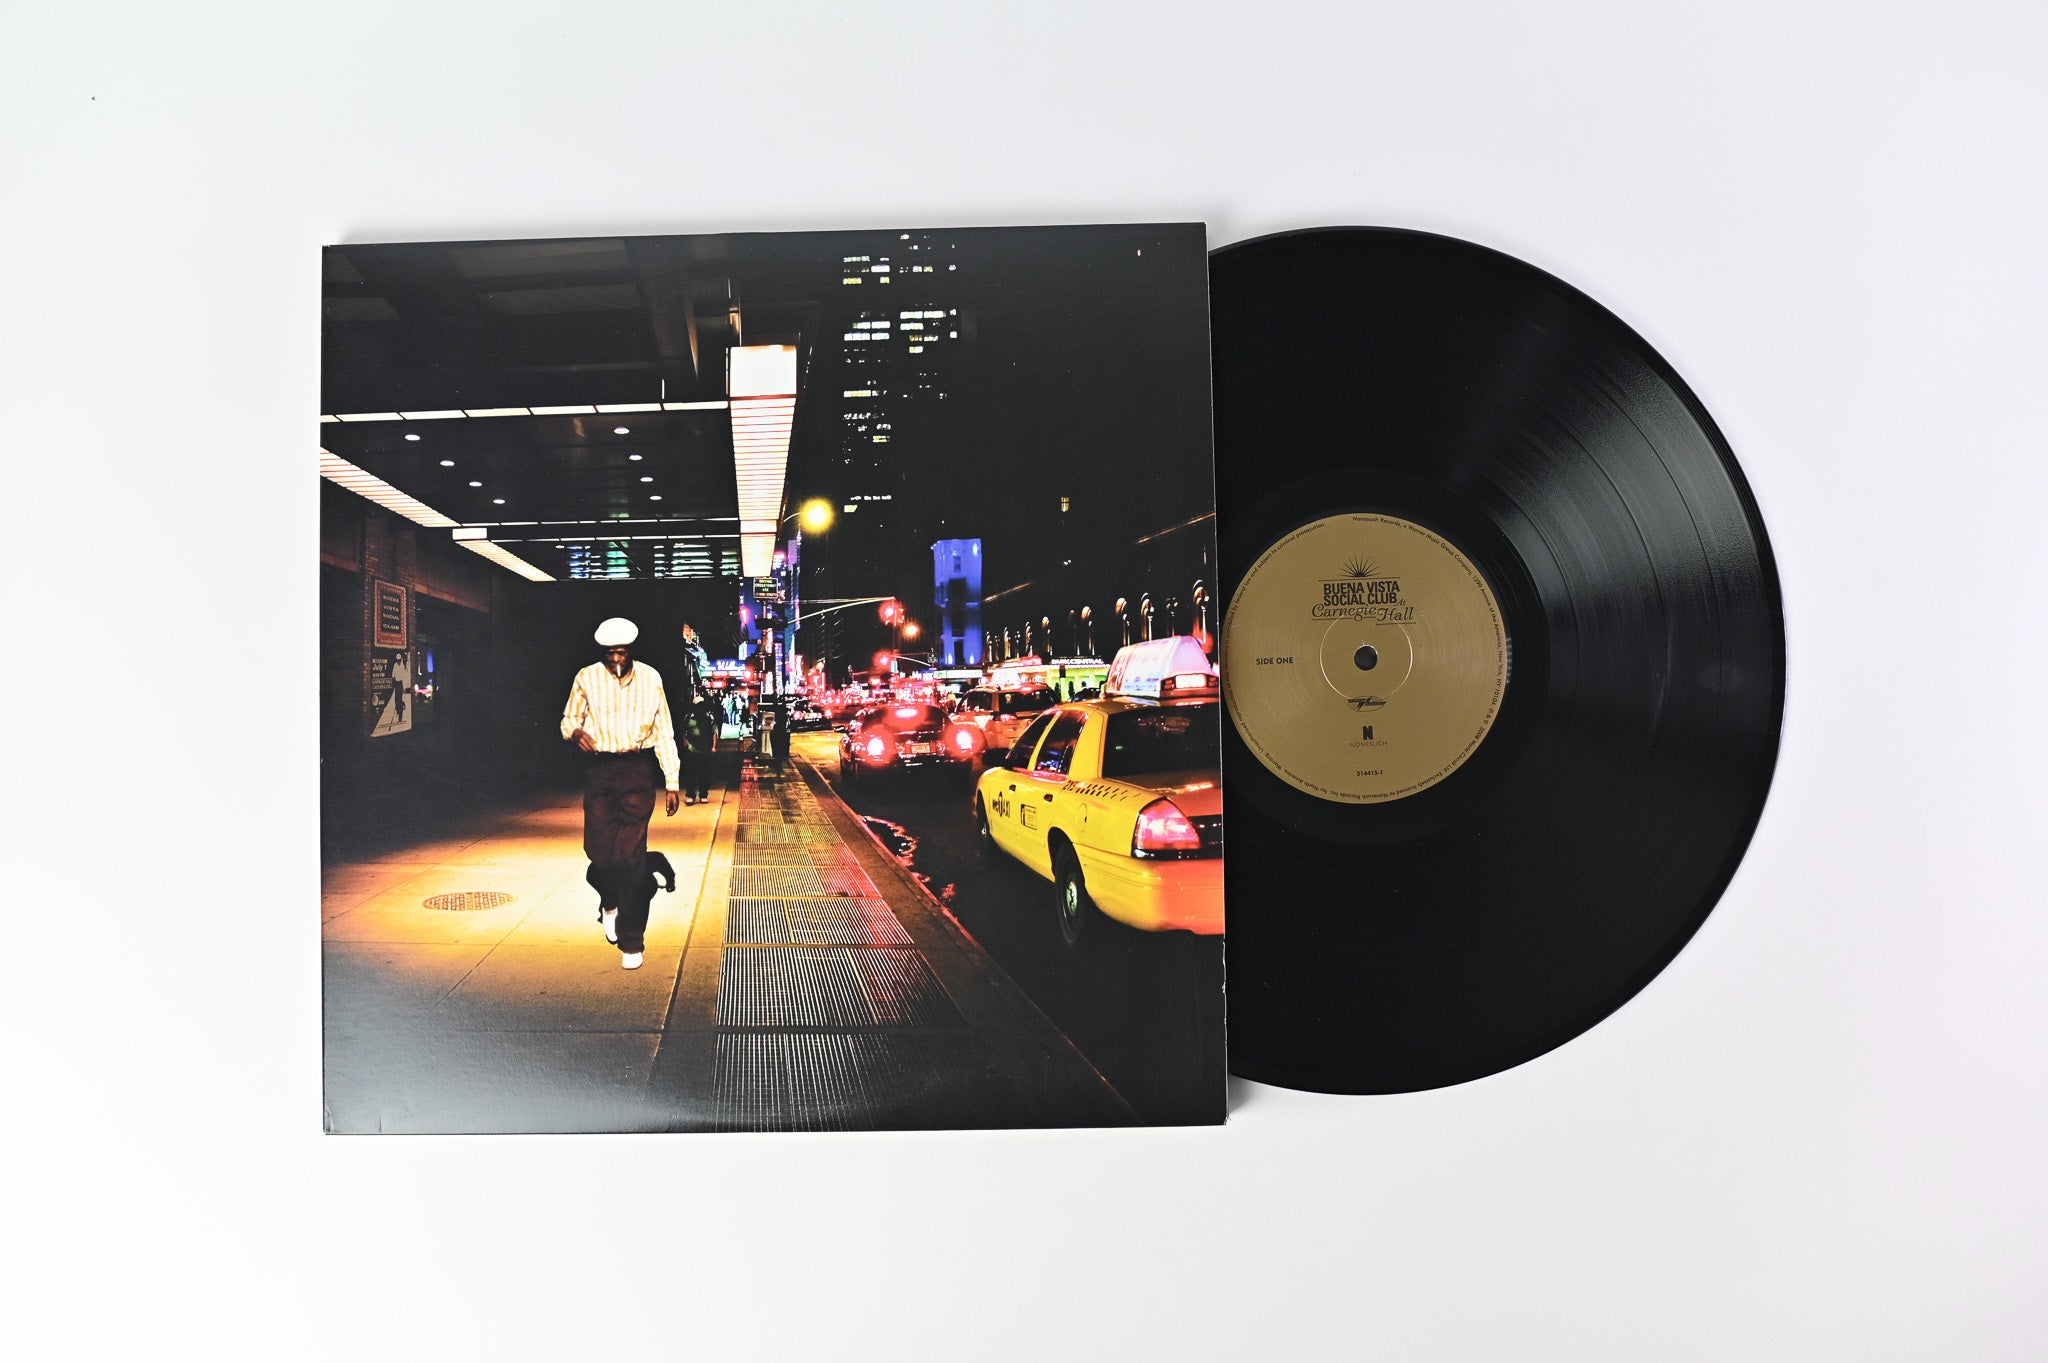 Buena Vista Social Club - Buena Vista Social Club At Carnegie Hall on Nonesuch